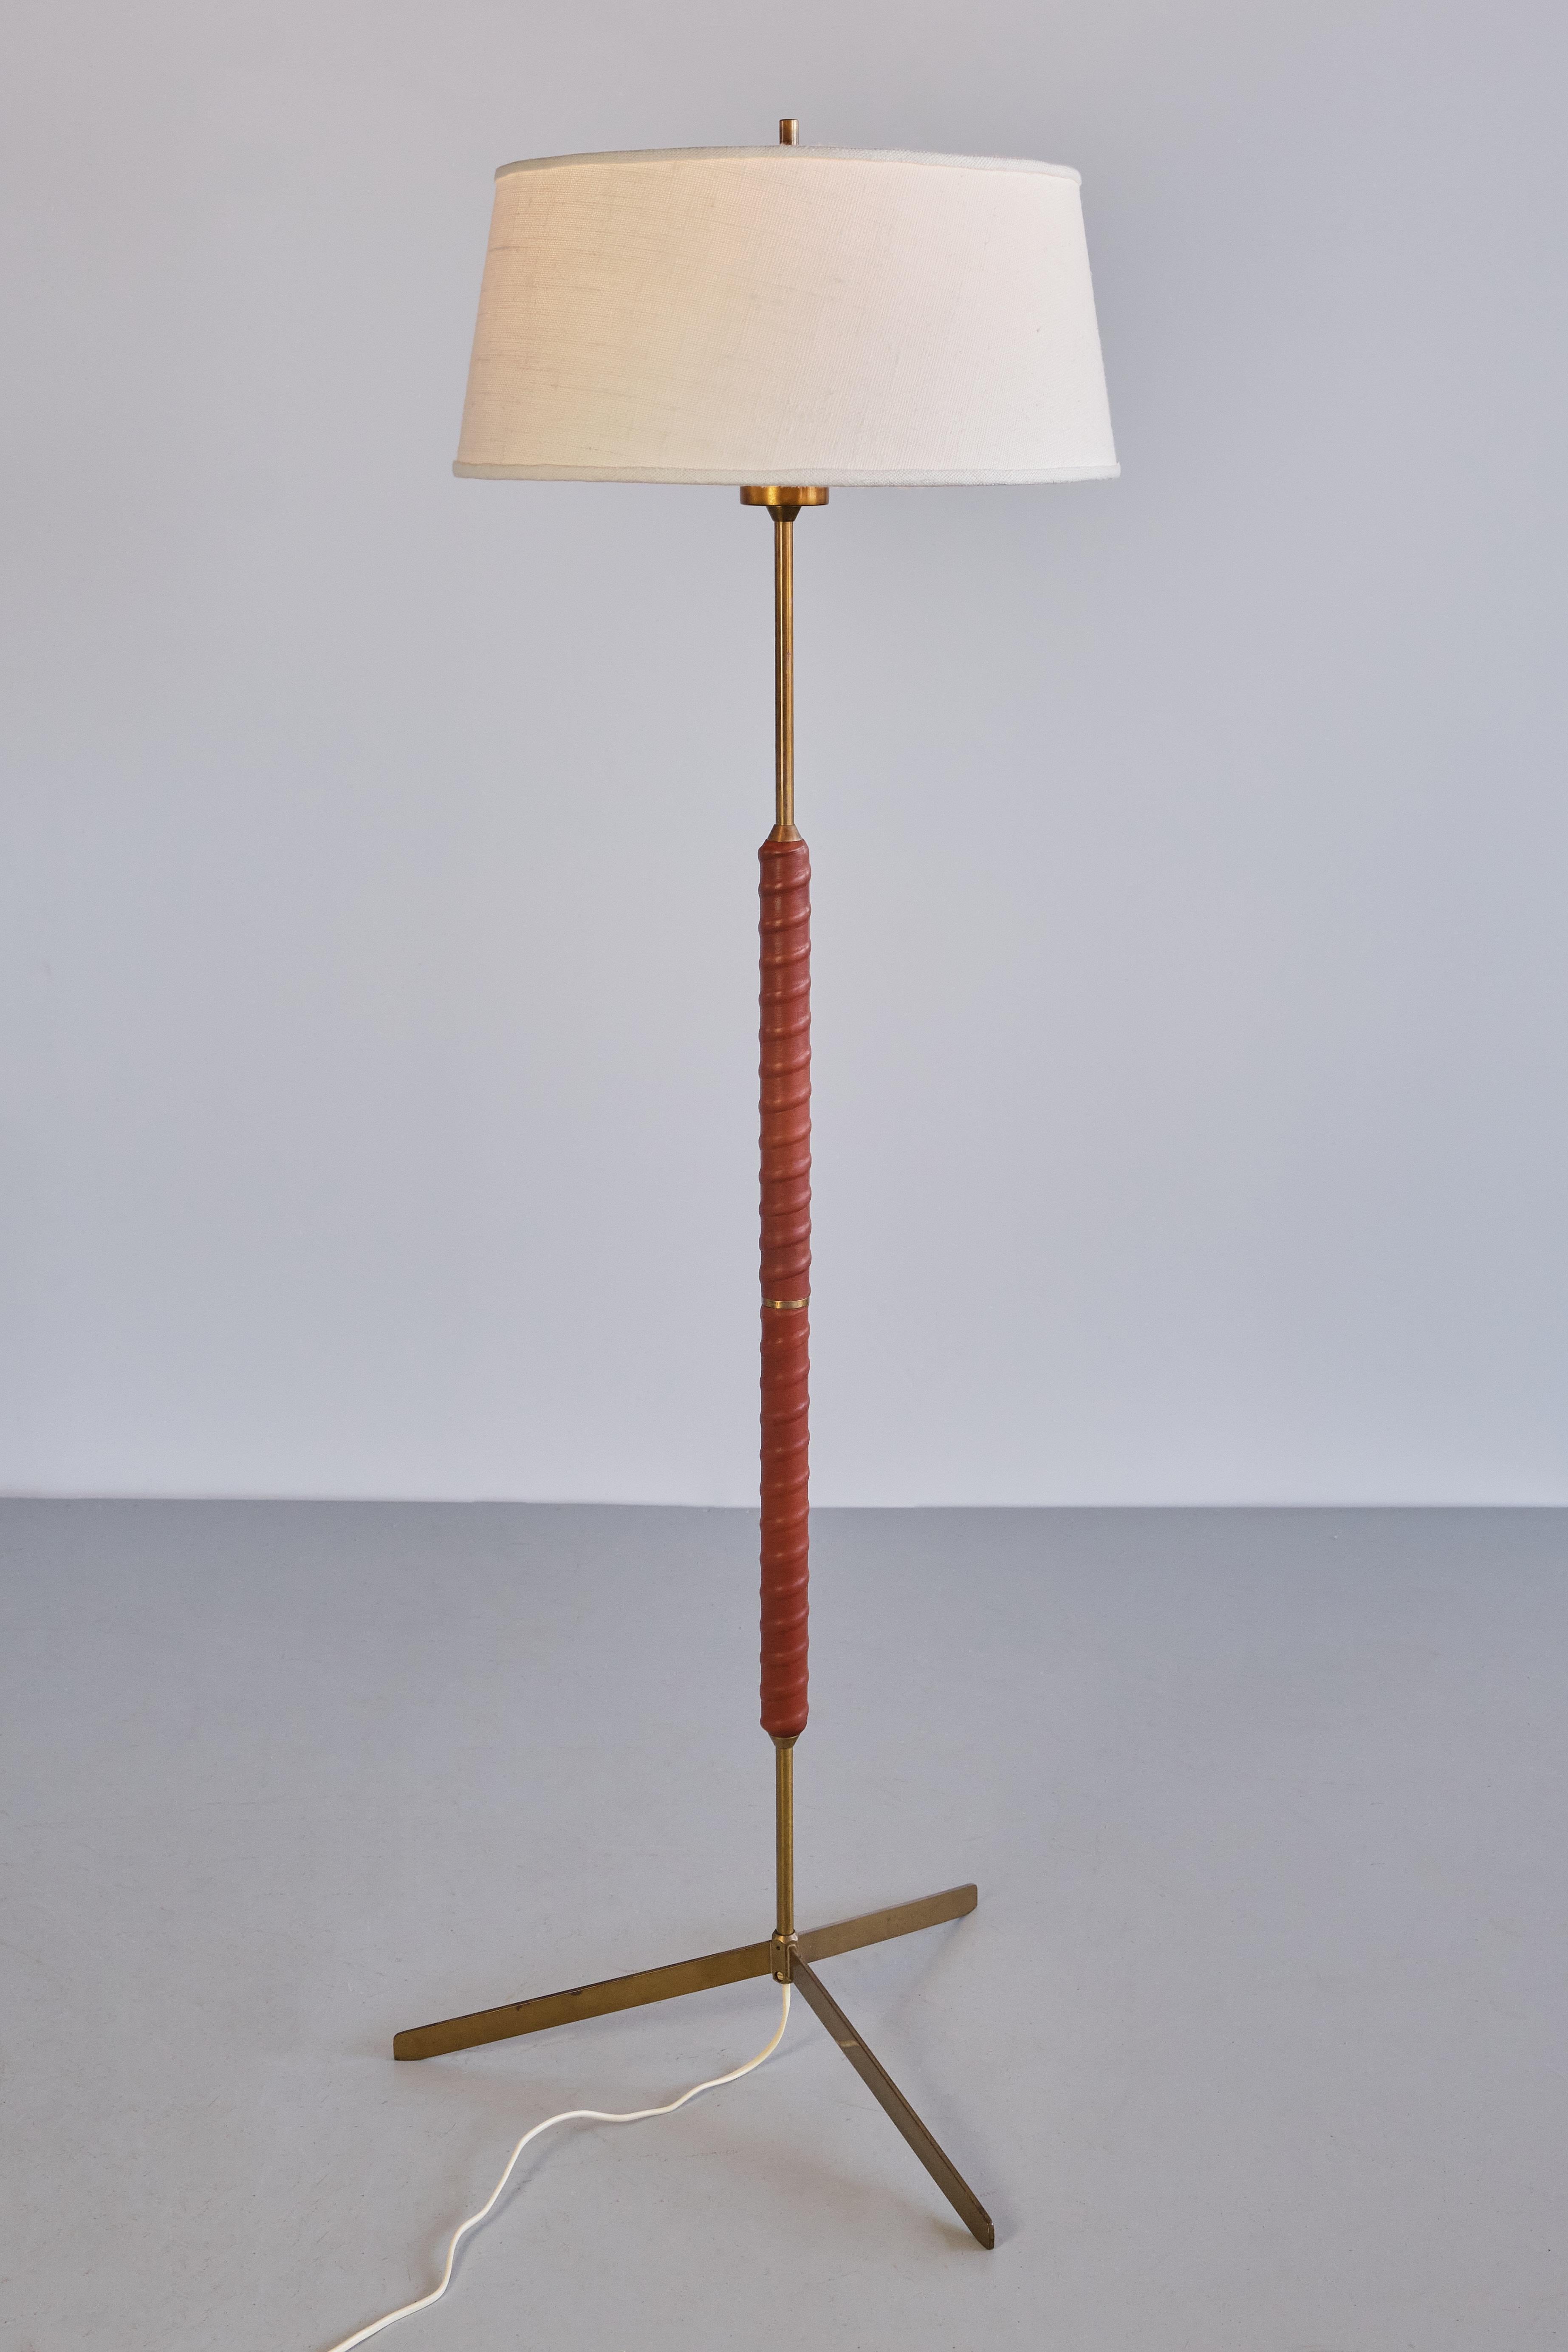 Mid-20th Century Pair of Bergboms G-31 Floor Lamps in Brass, Leather and Linen, Sweden, 1940s For Sale